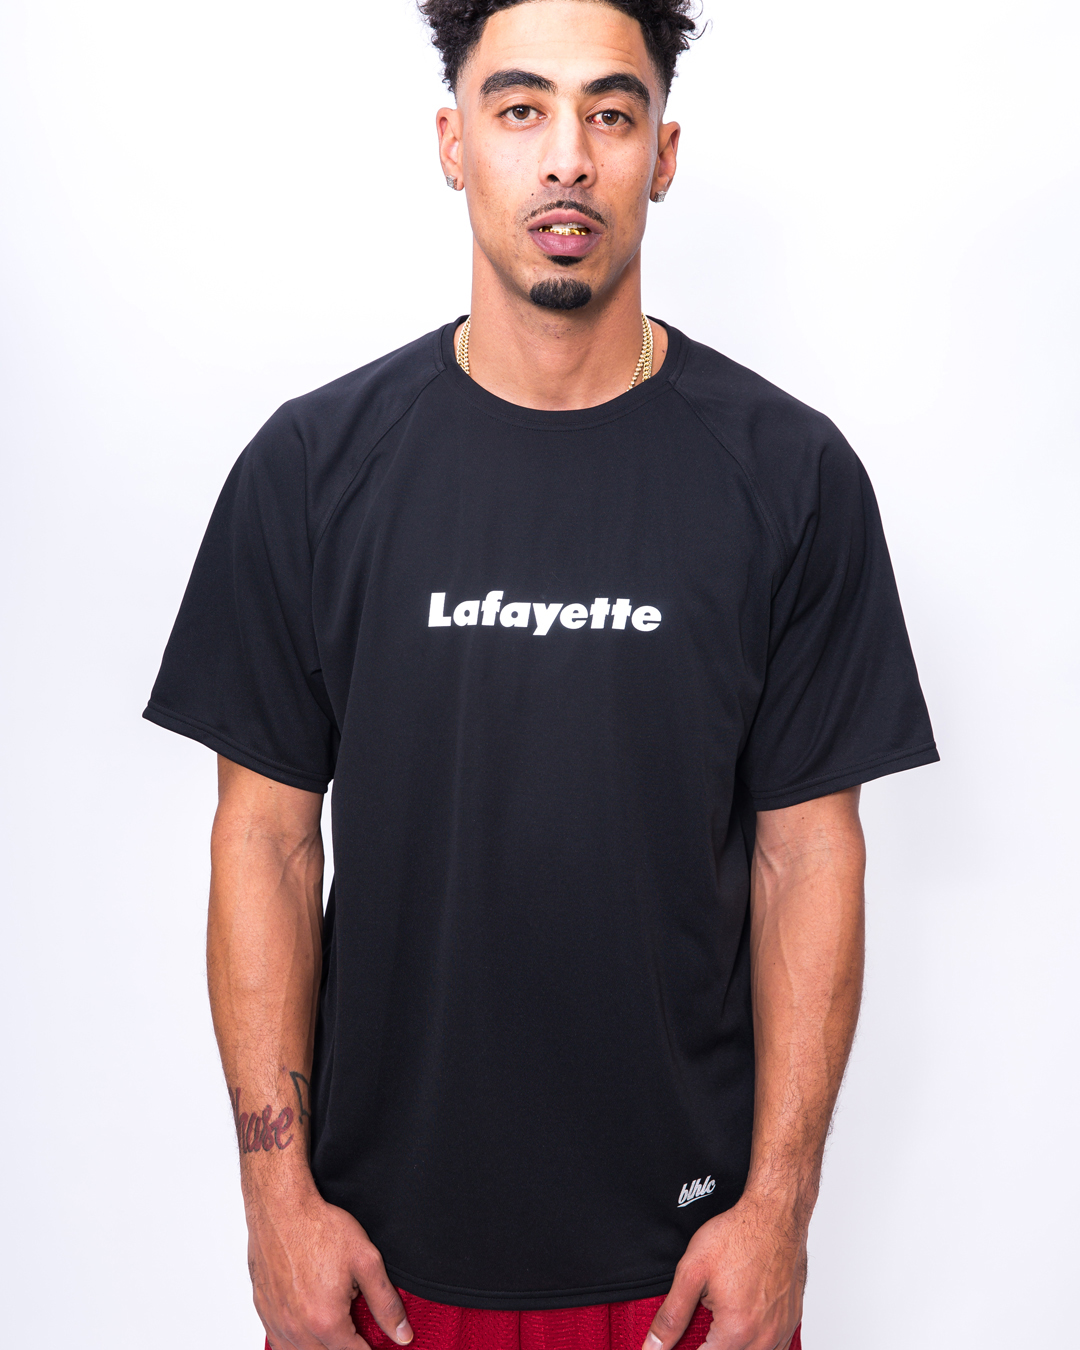 Lafayette 2017 SPRING/SUMMER COLLECTION – DELIVERY.14 – ラファ